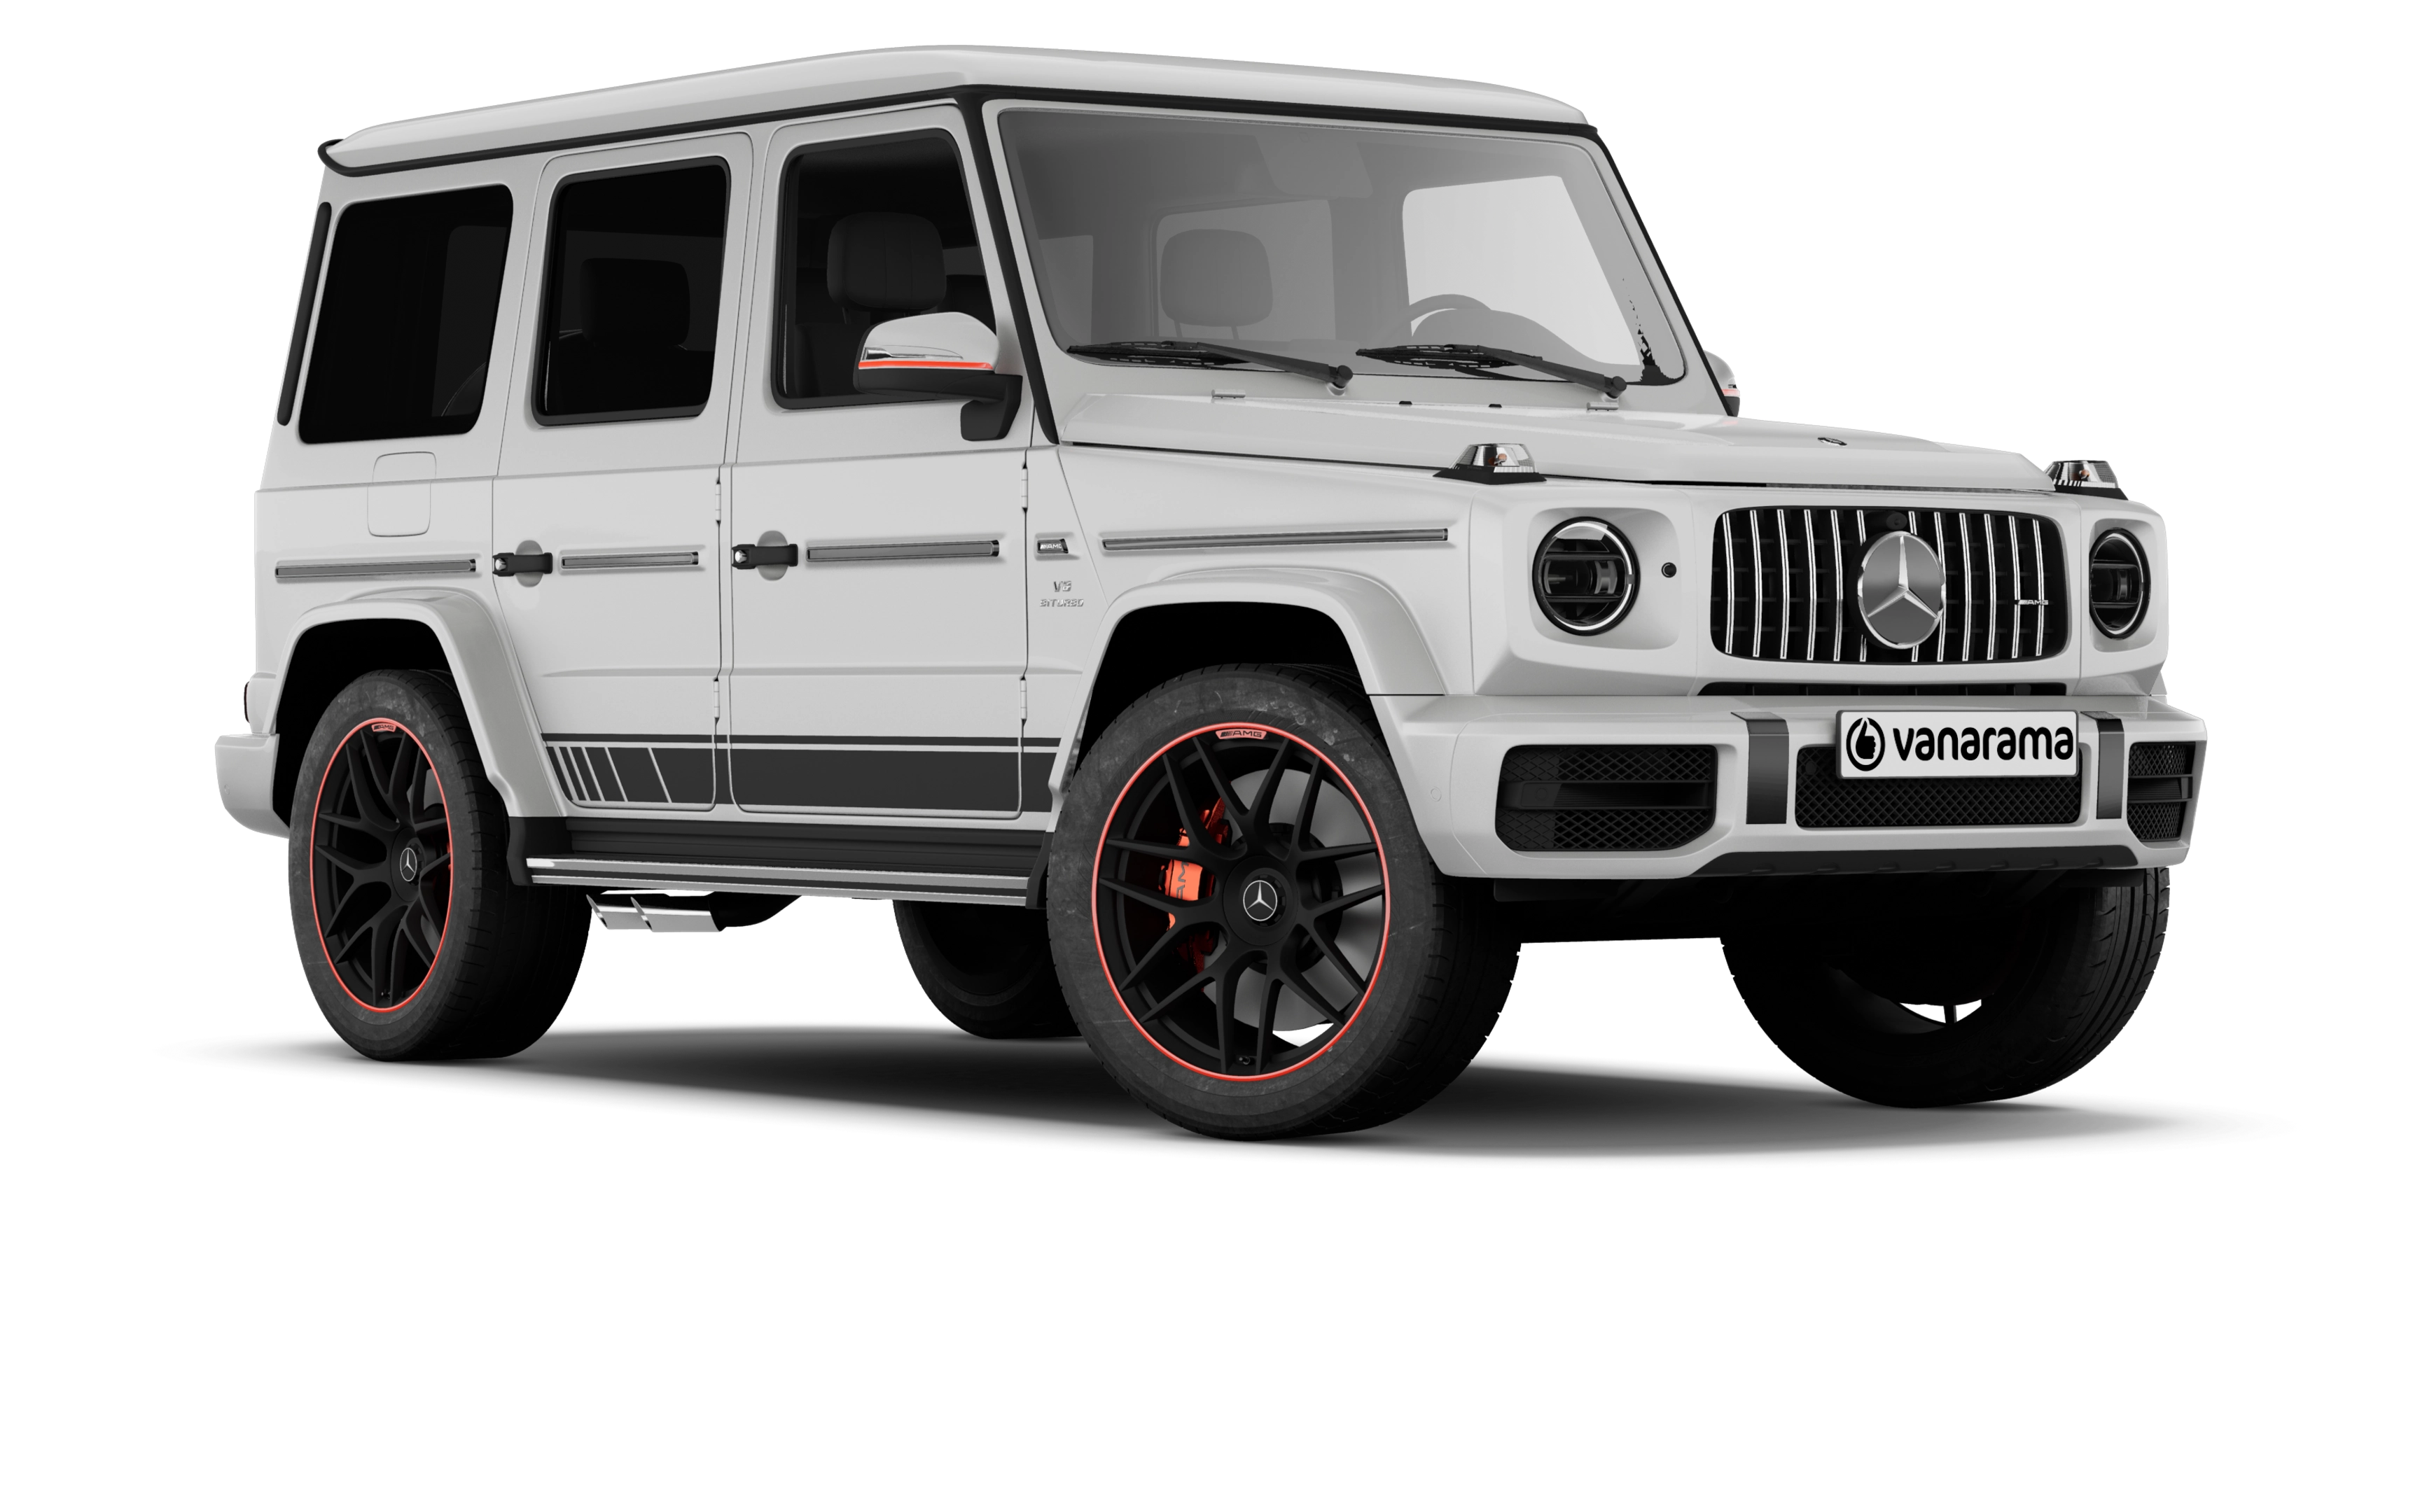 Mercedes-benz g class amg station wagon g63 carbon edition 5 doors 9g-tronic